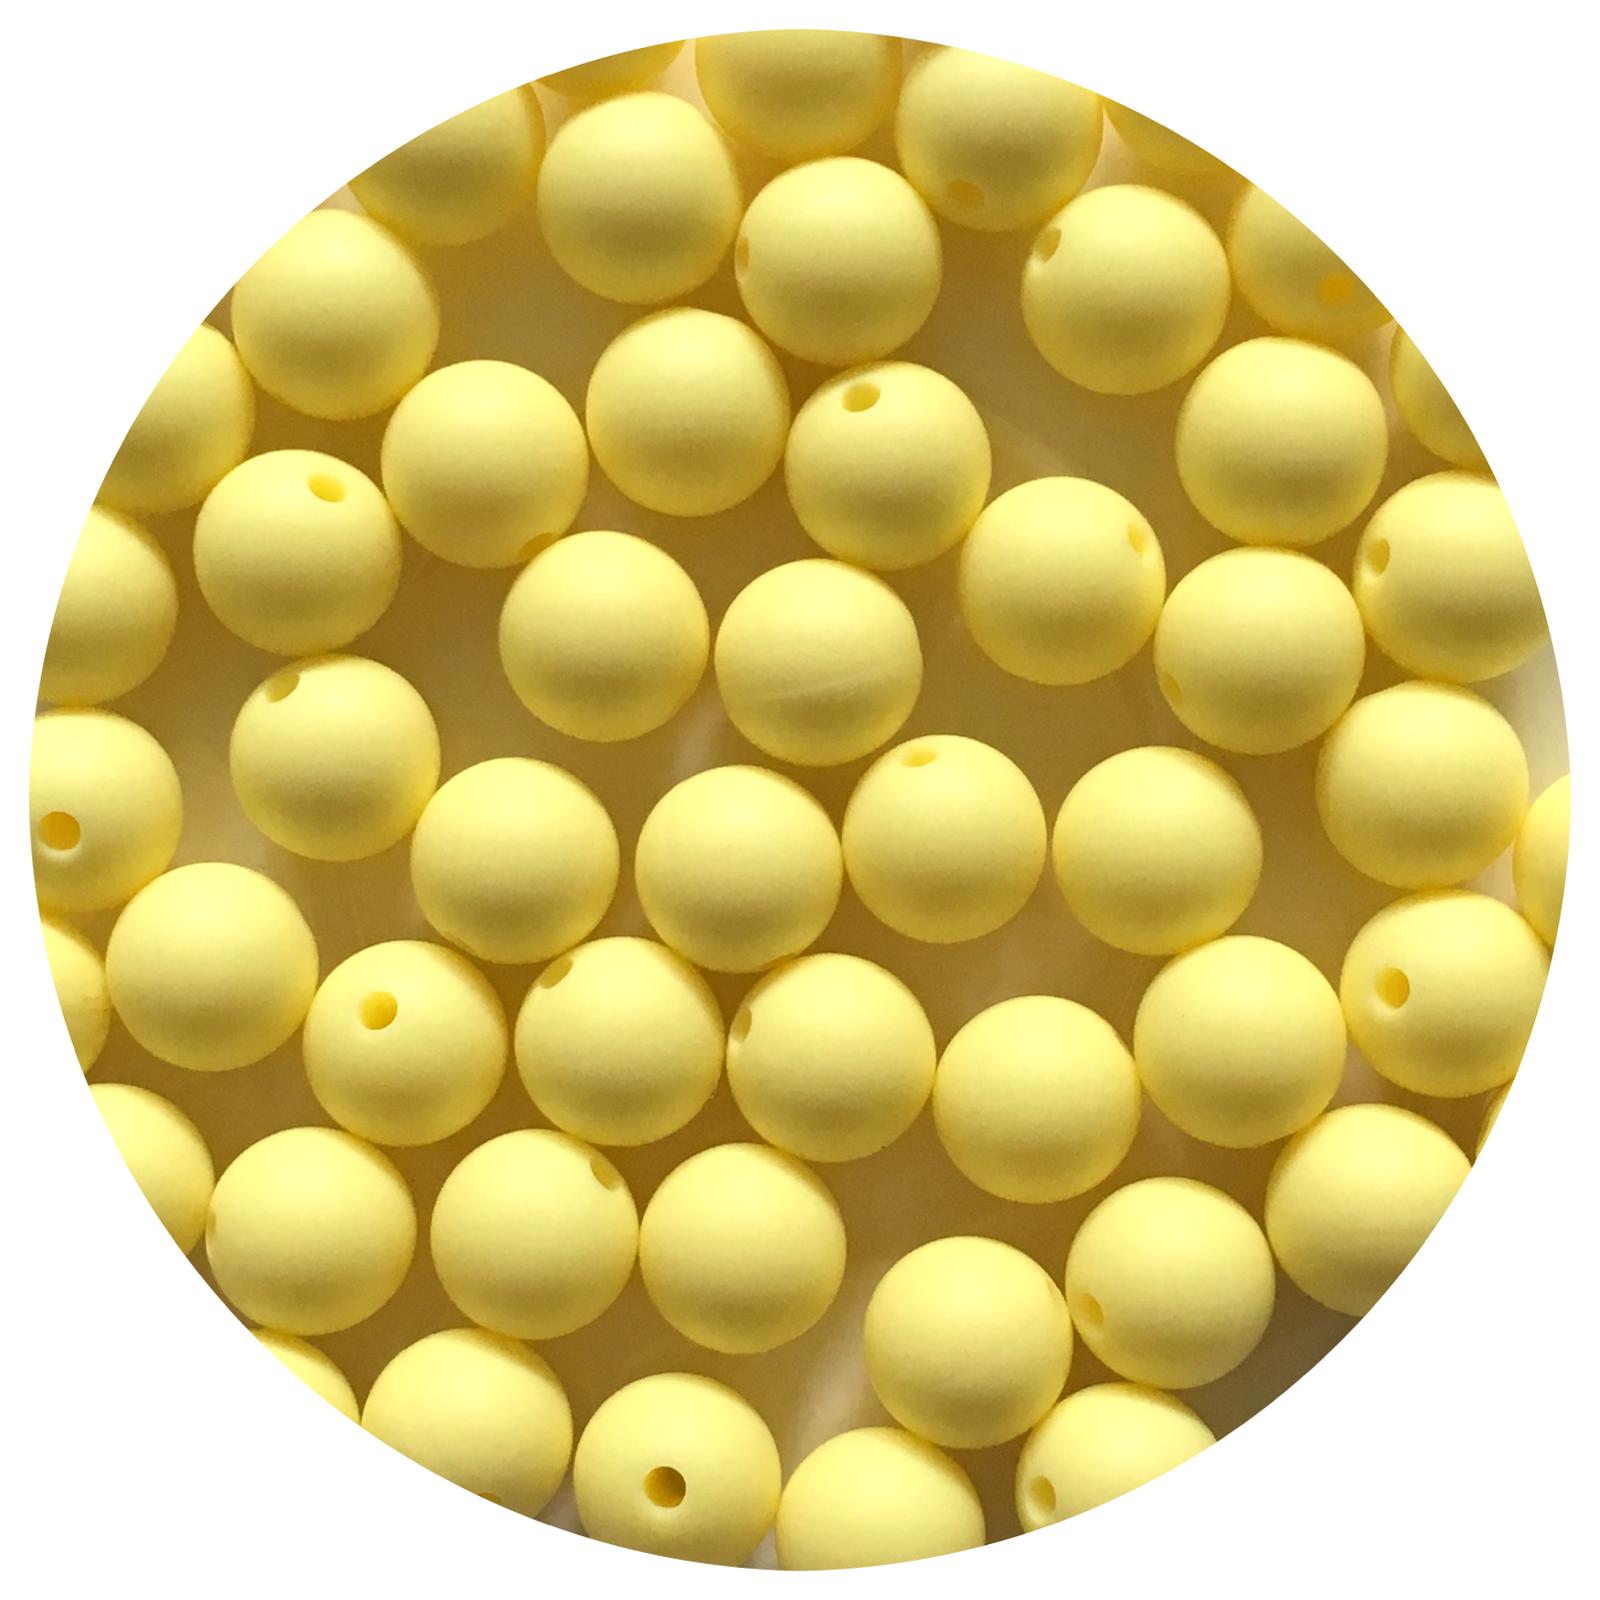 Buttery Yellow - 12mm Round Silicone Beads - 10 beads